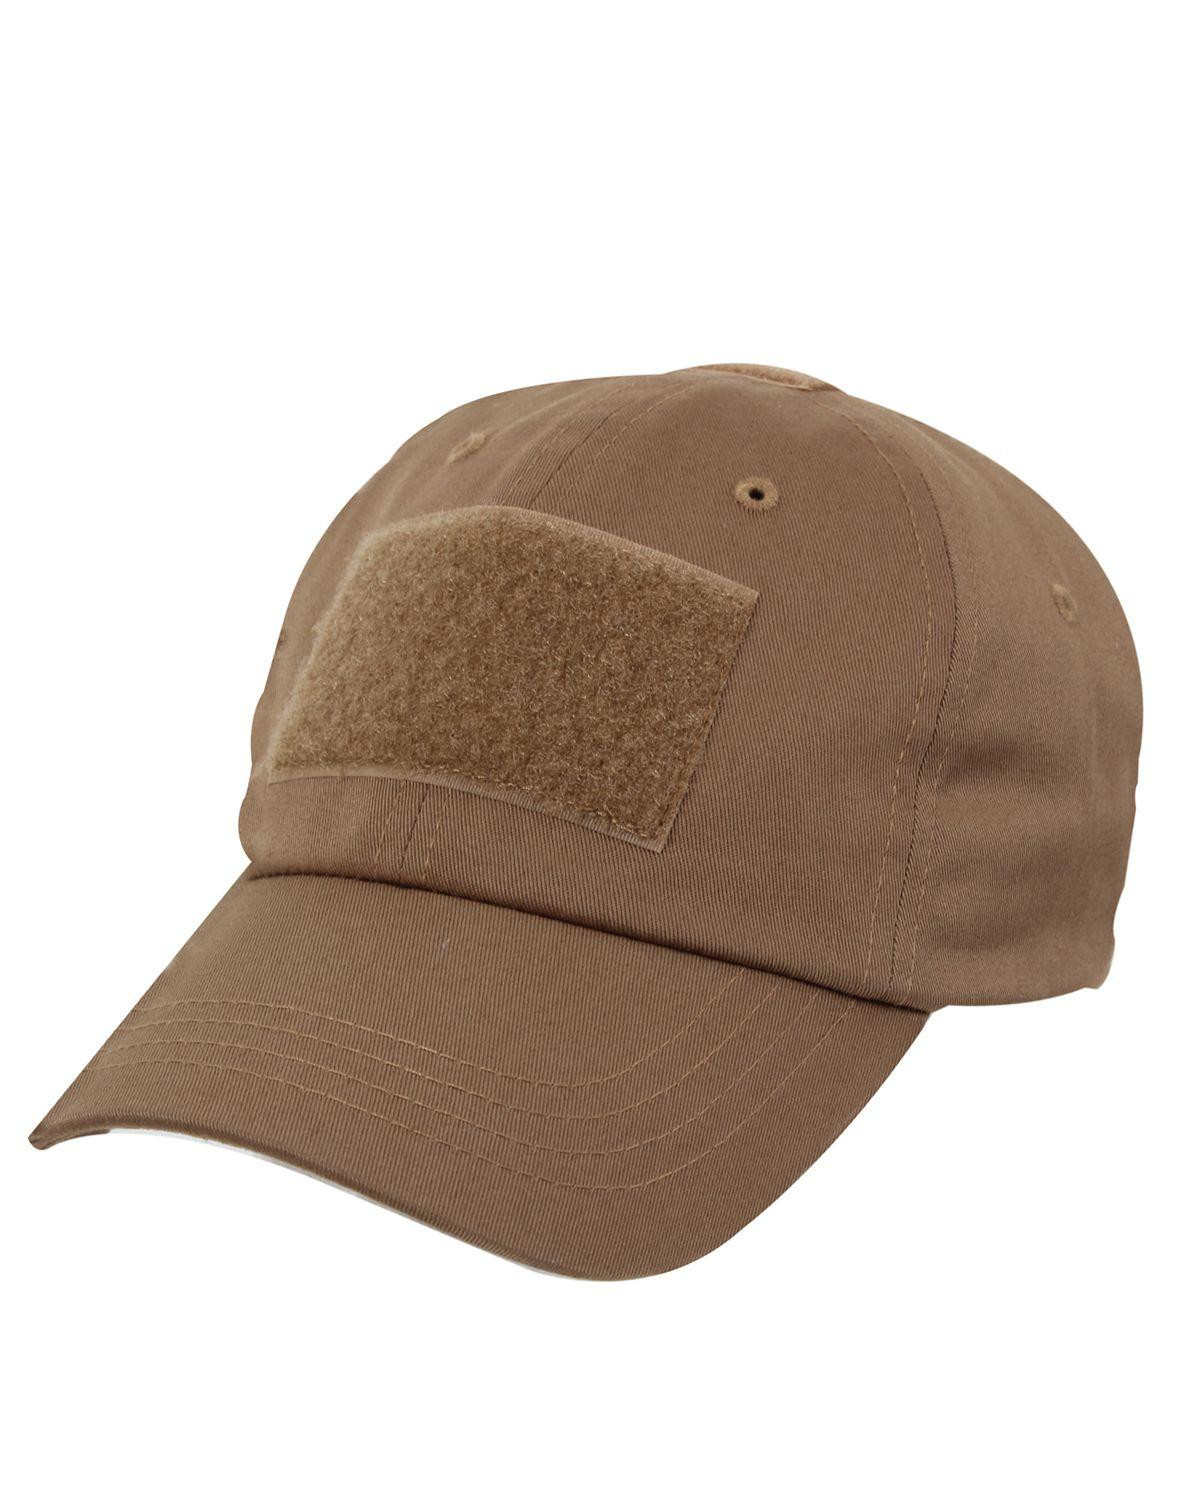 Rothco Velcro Cap (Coyote Brun, One Size)